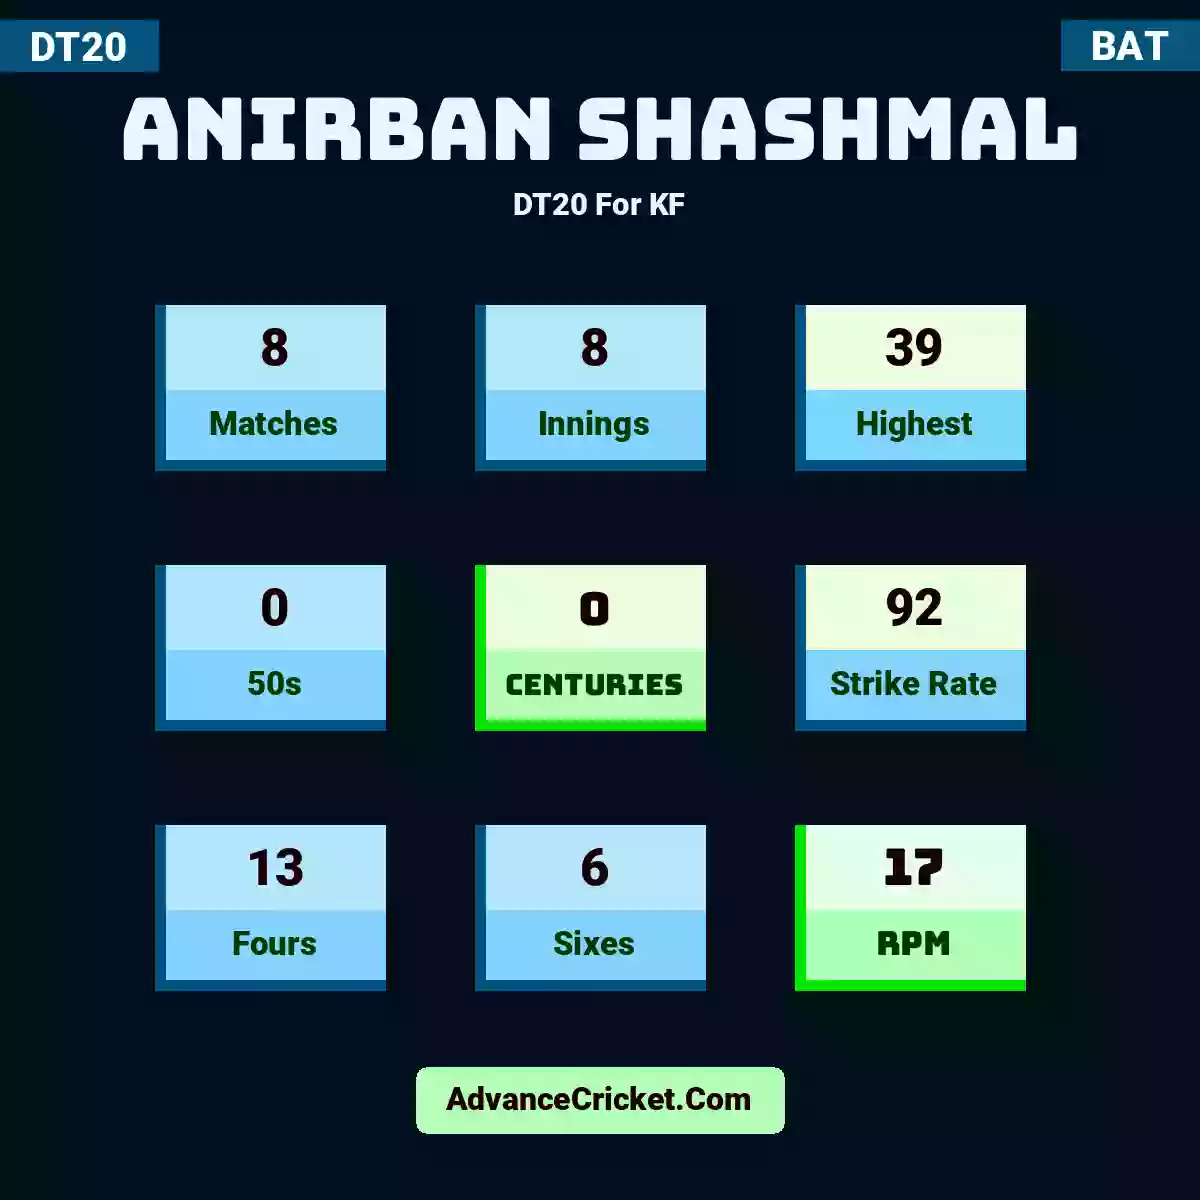 Anirban Shashmal DT20  For KF, Anirban Shashmal played 8 matches, scored 39 runs as highest, 0 half-centuries, and 0 centuries, with a strike rate of 92. A.Shashmal hit 13 fours and 6 sixes, with an RPM of 17.